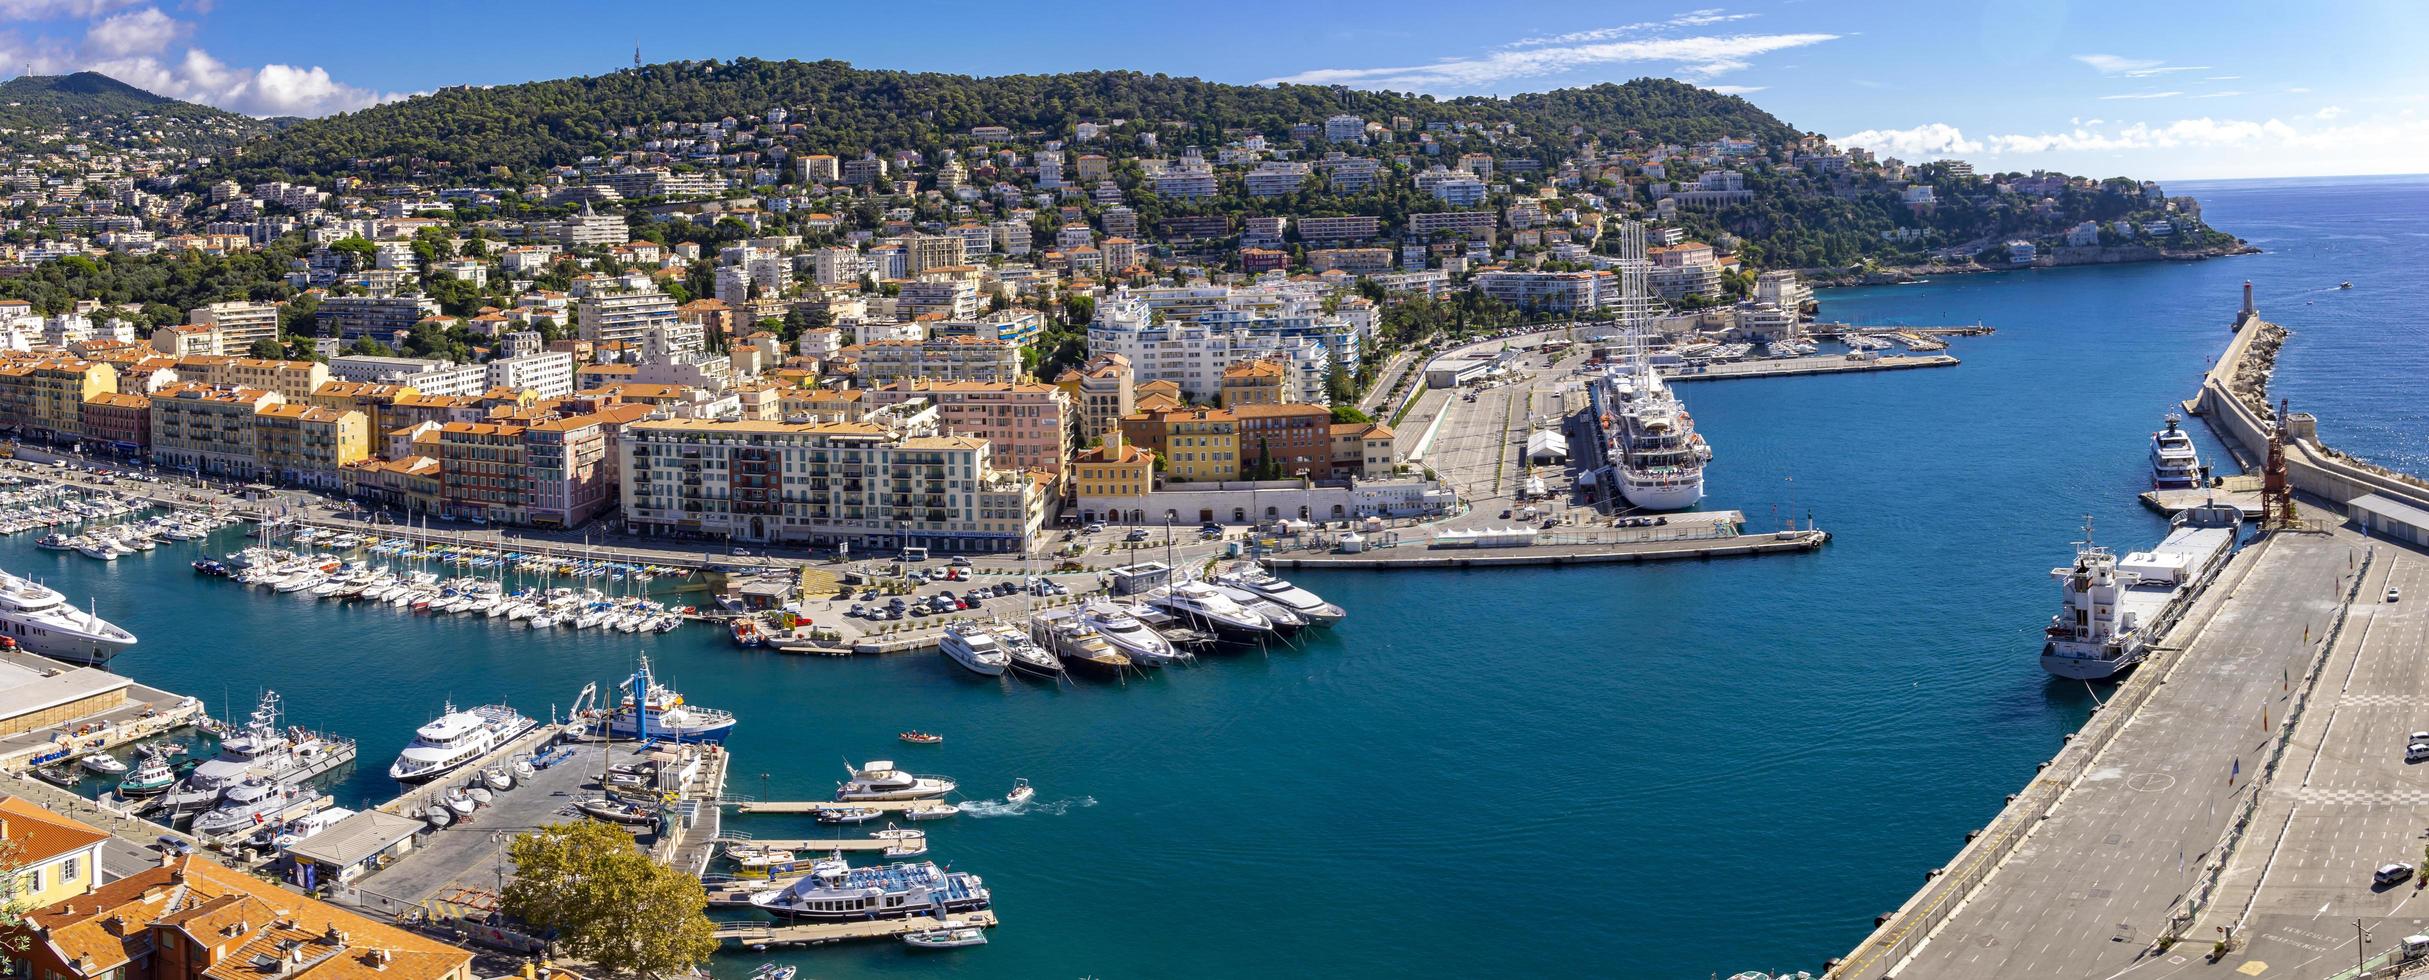 NICE, FRANCE, OCTOBER 6, 2019 - View at Port Lympia in Nice, France. Buit at 1748, it is one of the oldest port facilities on the French Riviera. photo